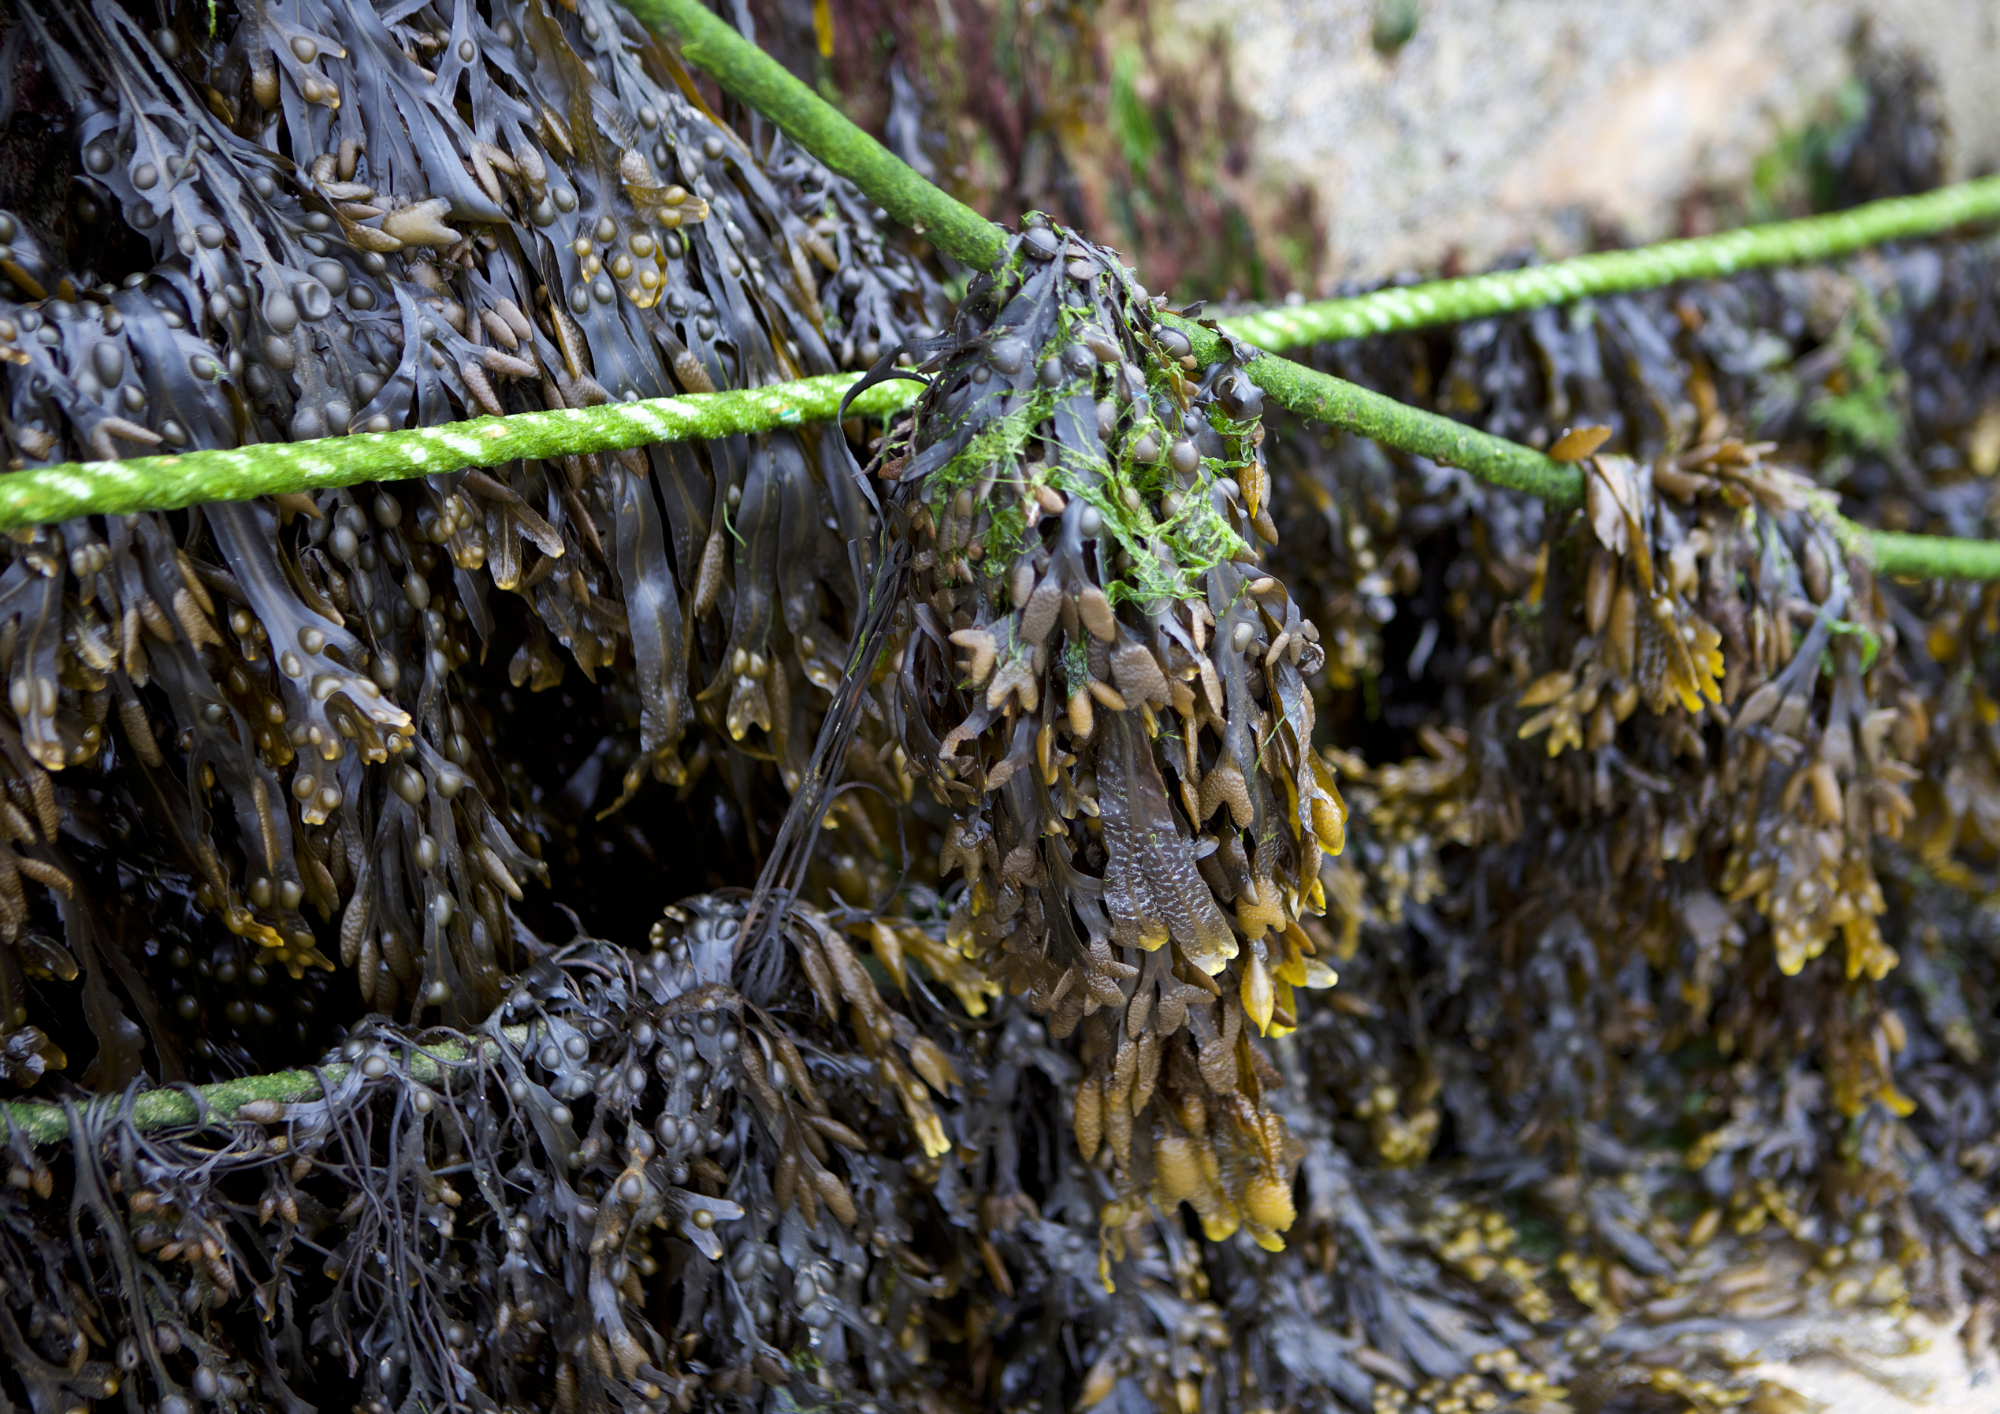 Can innovation unlock the potential of seaweed in the UK?